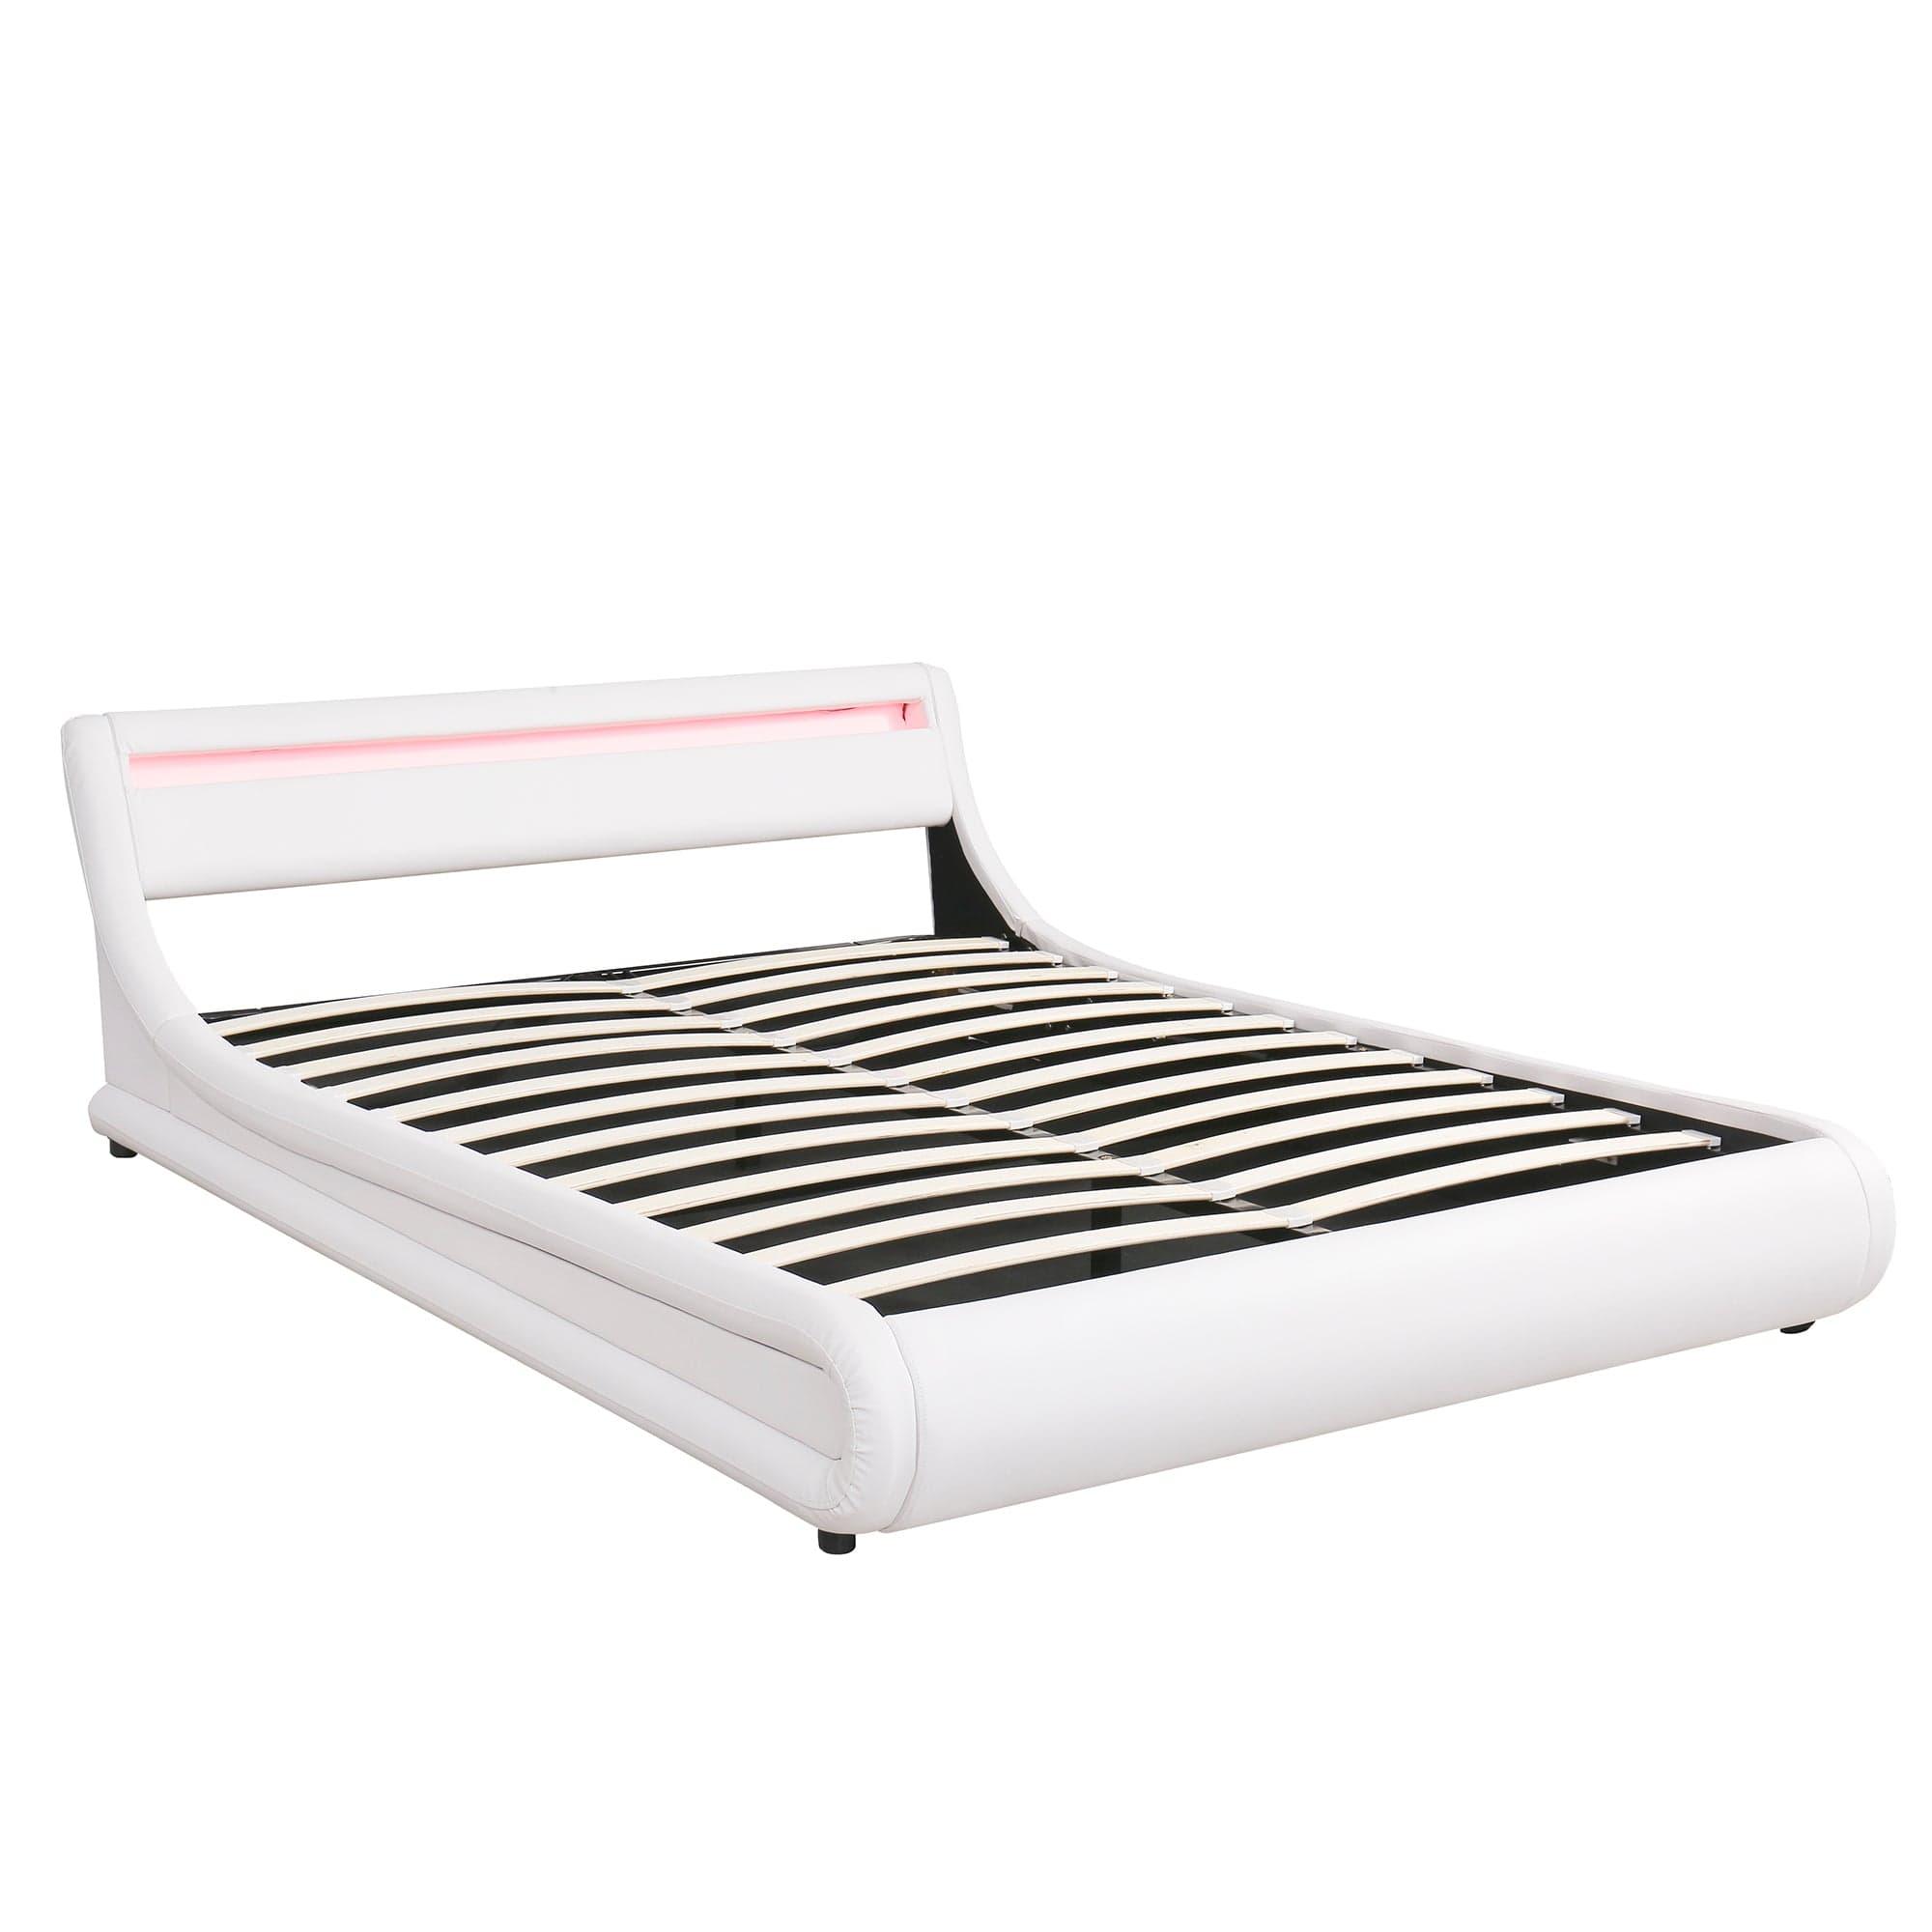 Shop Upholstered Faux Leather Platform bed with a Hydraulic Storage System with LED Light Headboard Bed Frame with Slatted Queen Size Mademoiselle Home Decor